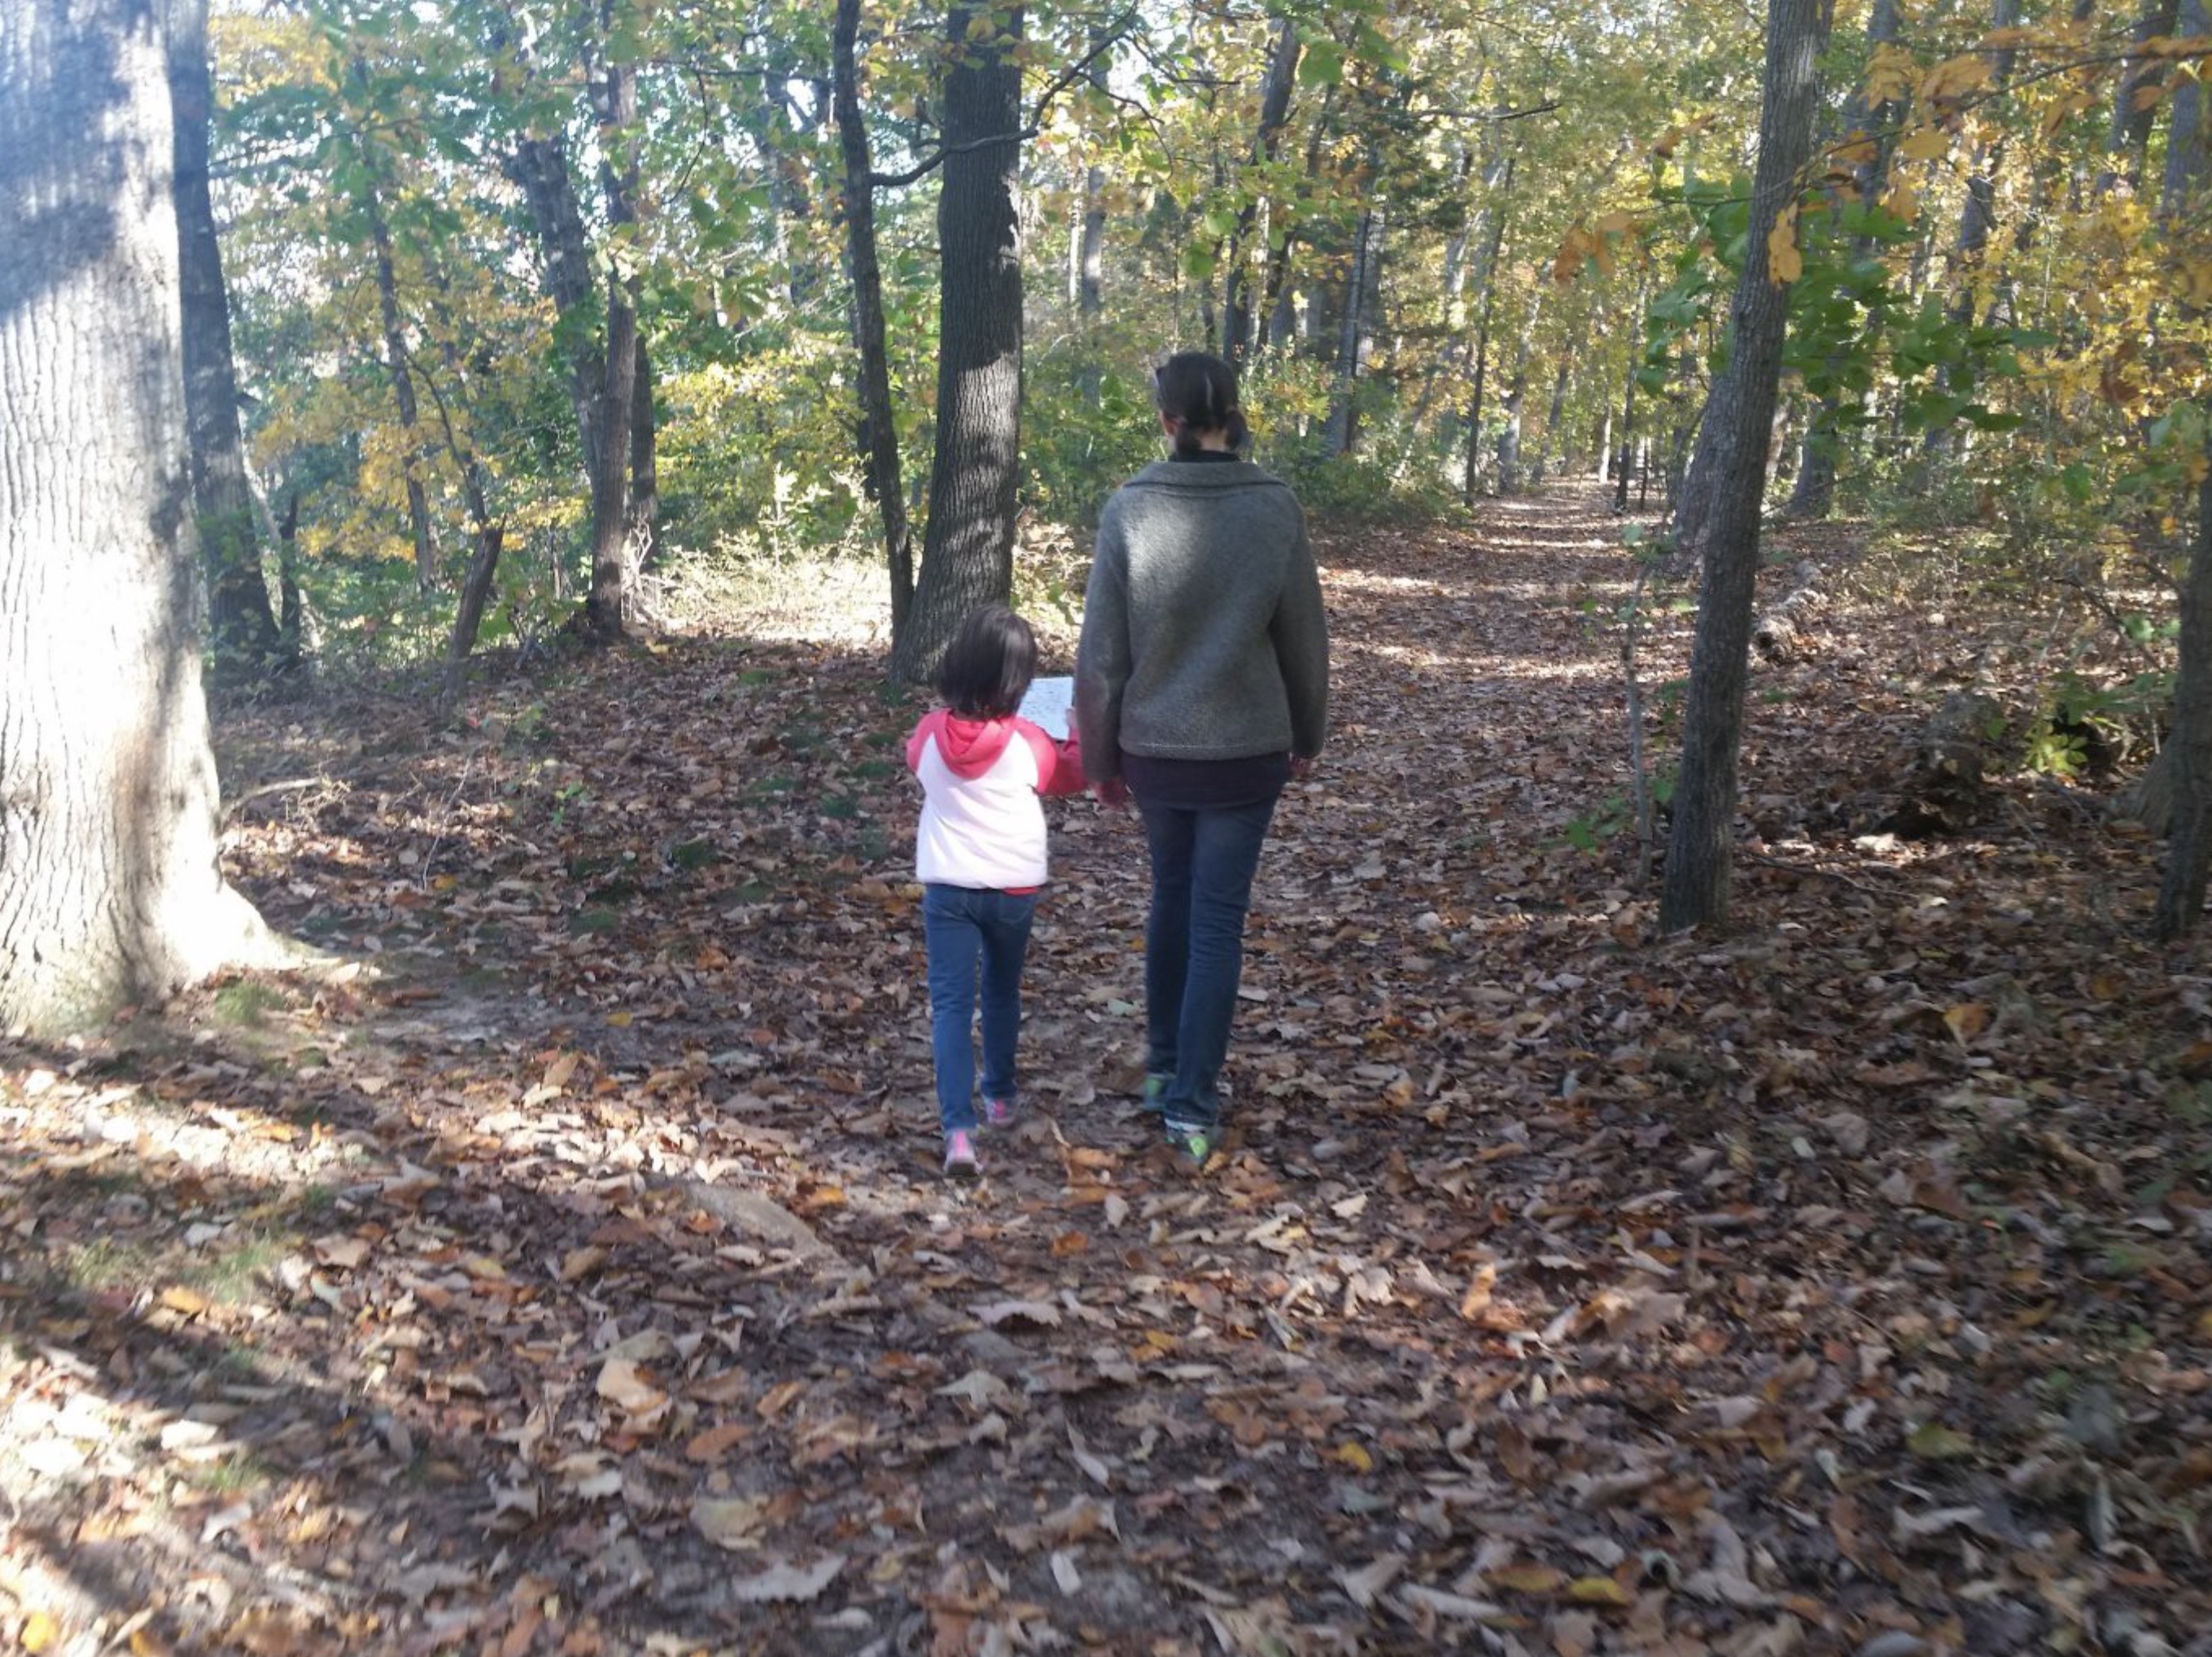 Woman and child walking through the trees on a leaf covered path.